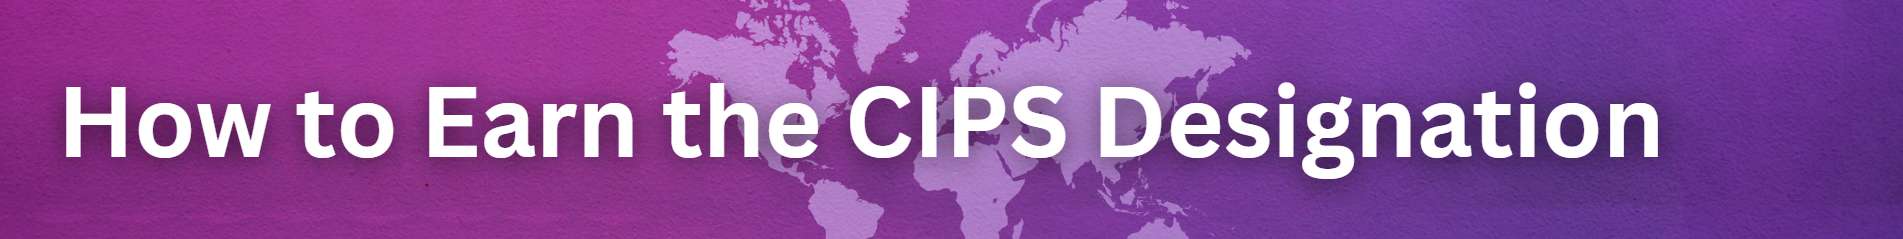 how to earn cips